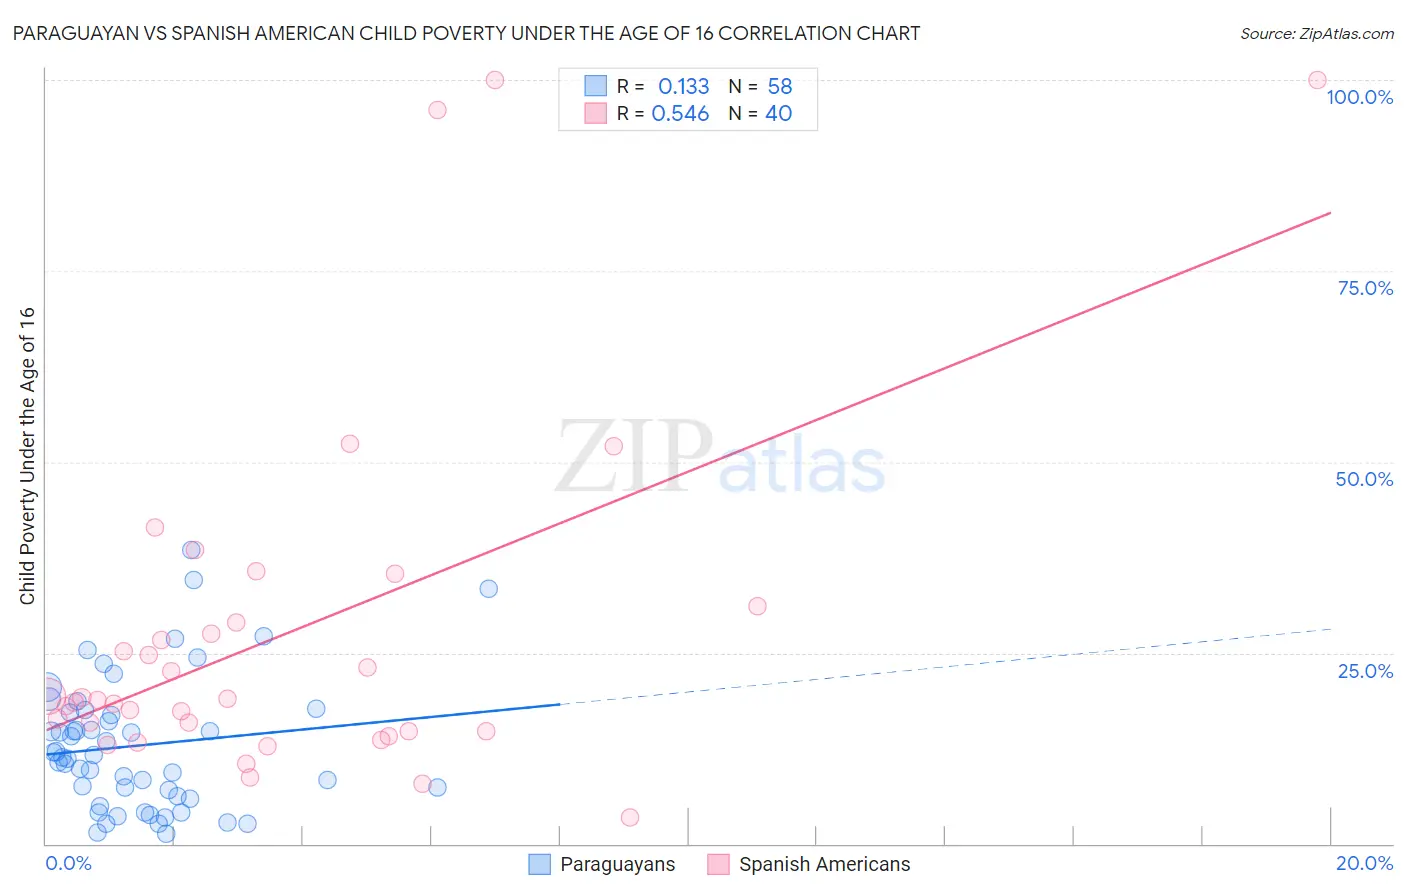 Paraguayan vs Spanish American Child Poverty Under the Age of 16